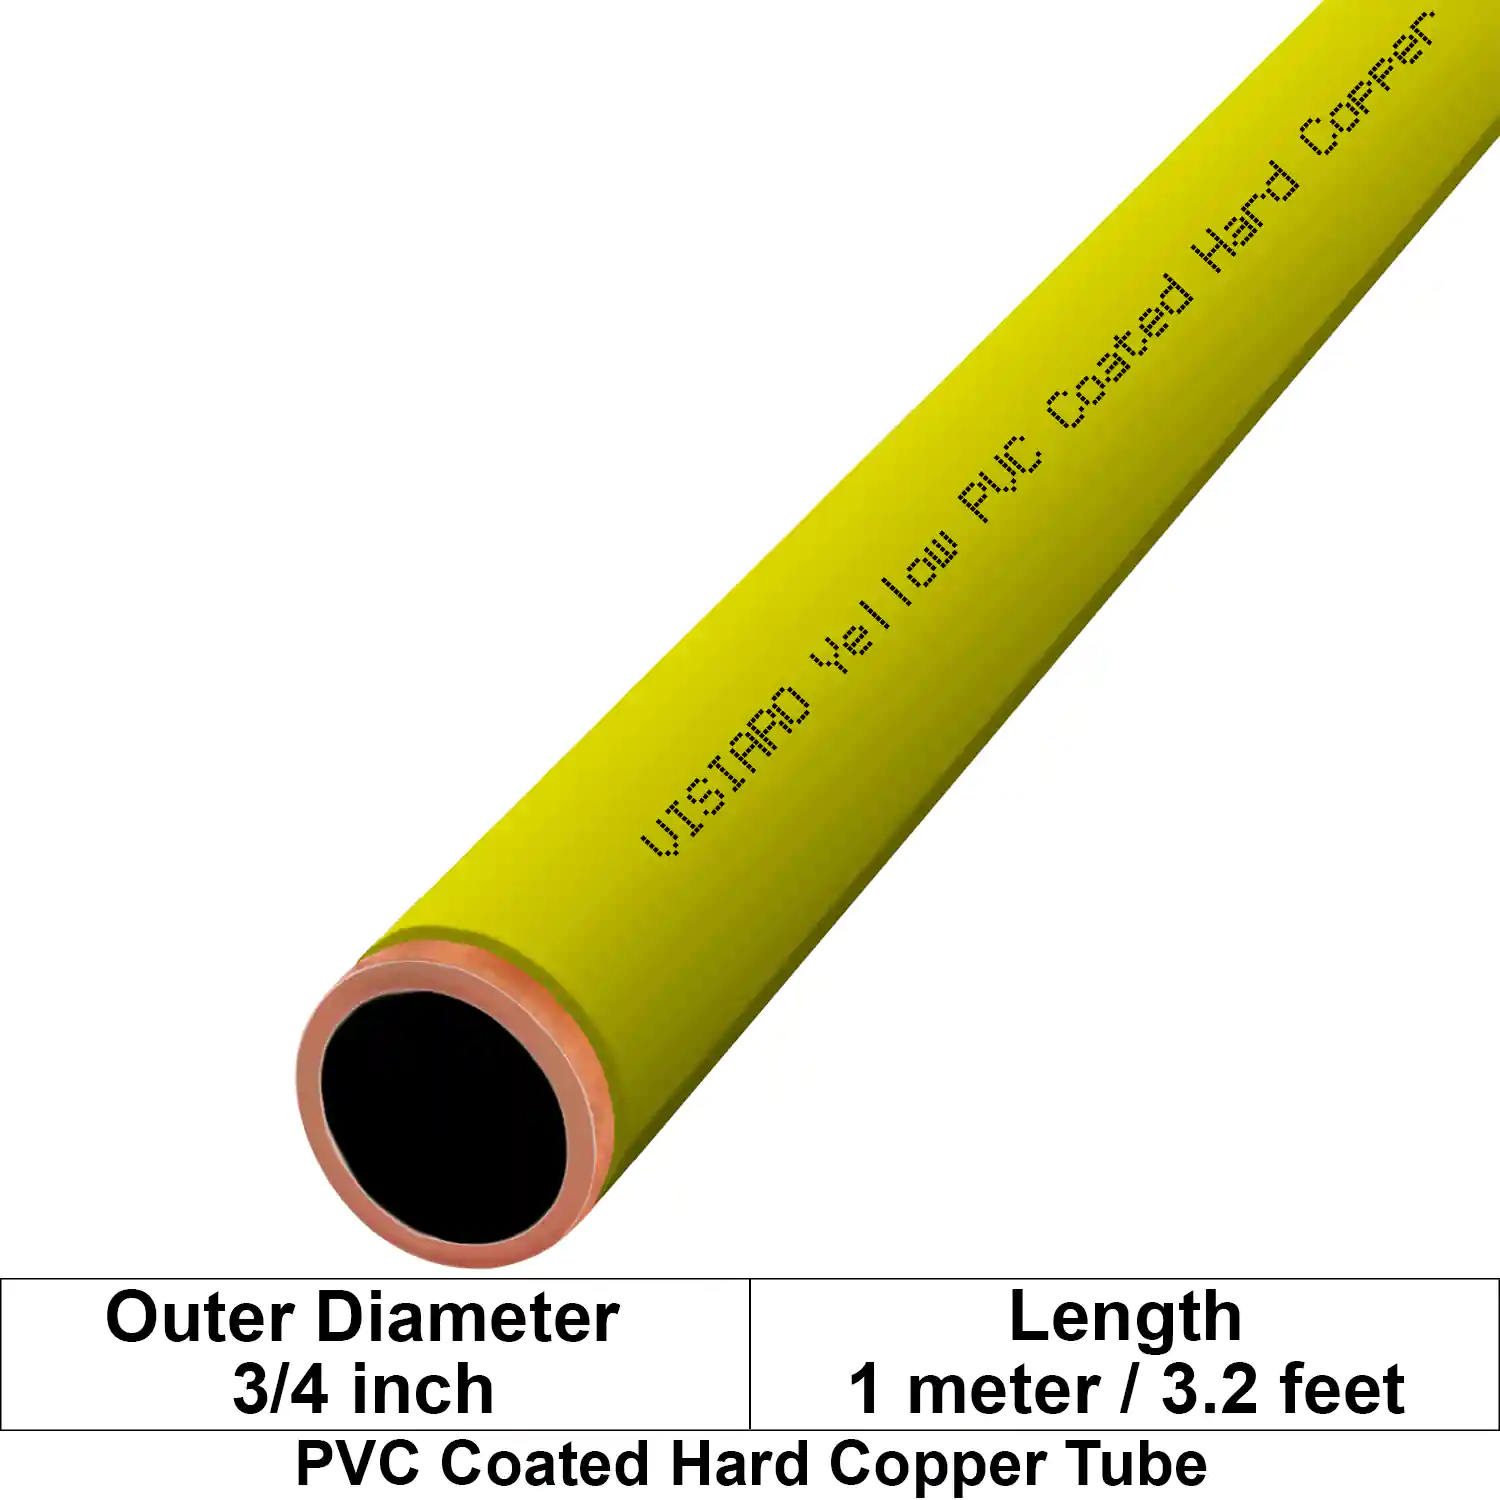 Visiaro Yellow PVC Coated Hard Copper Tube 1mtr long Outer Diameter - 3/4 inch